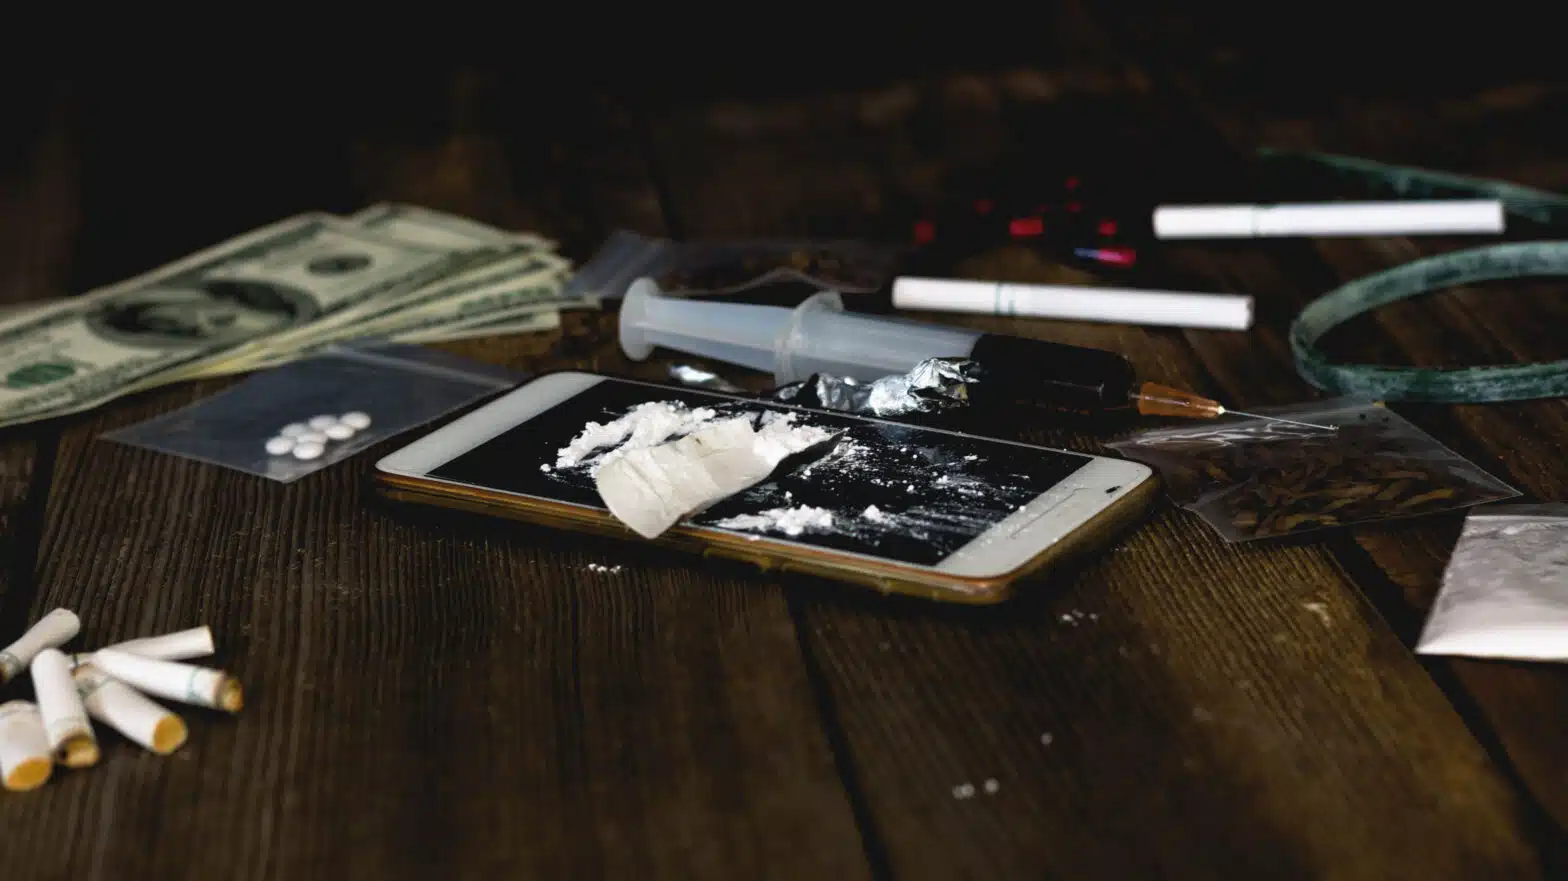 A collection of drug paraphernalia, cash, and a cell phone - Signs Someone May Be Using Drugs